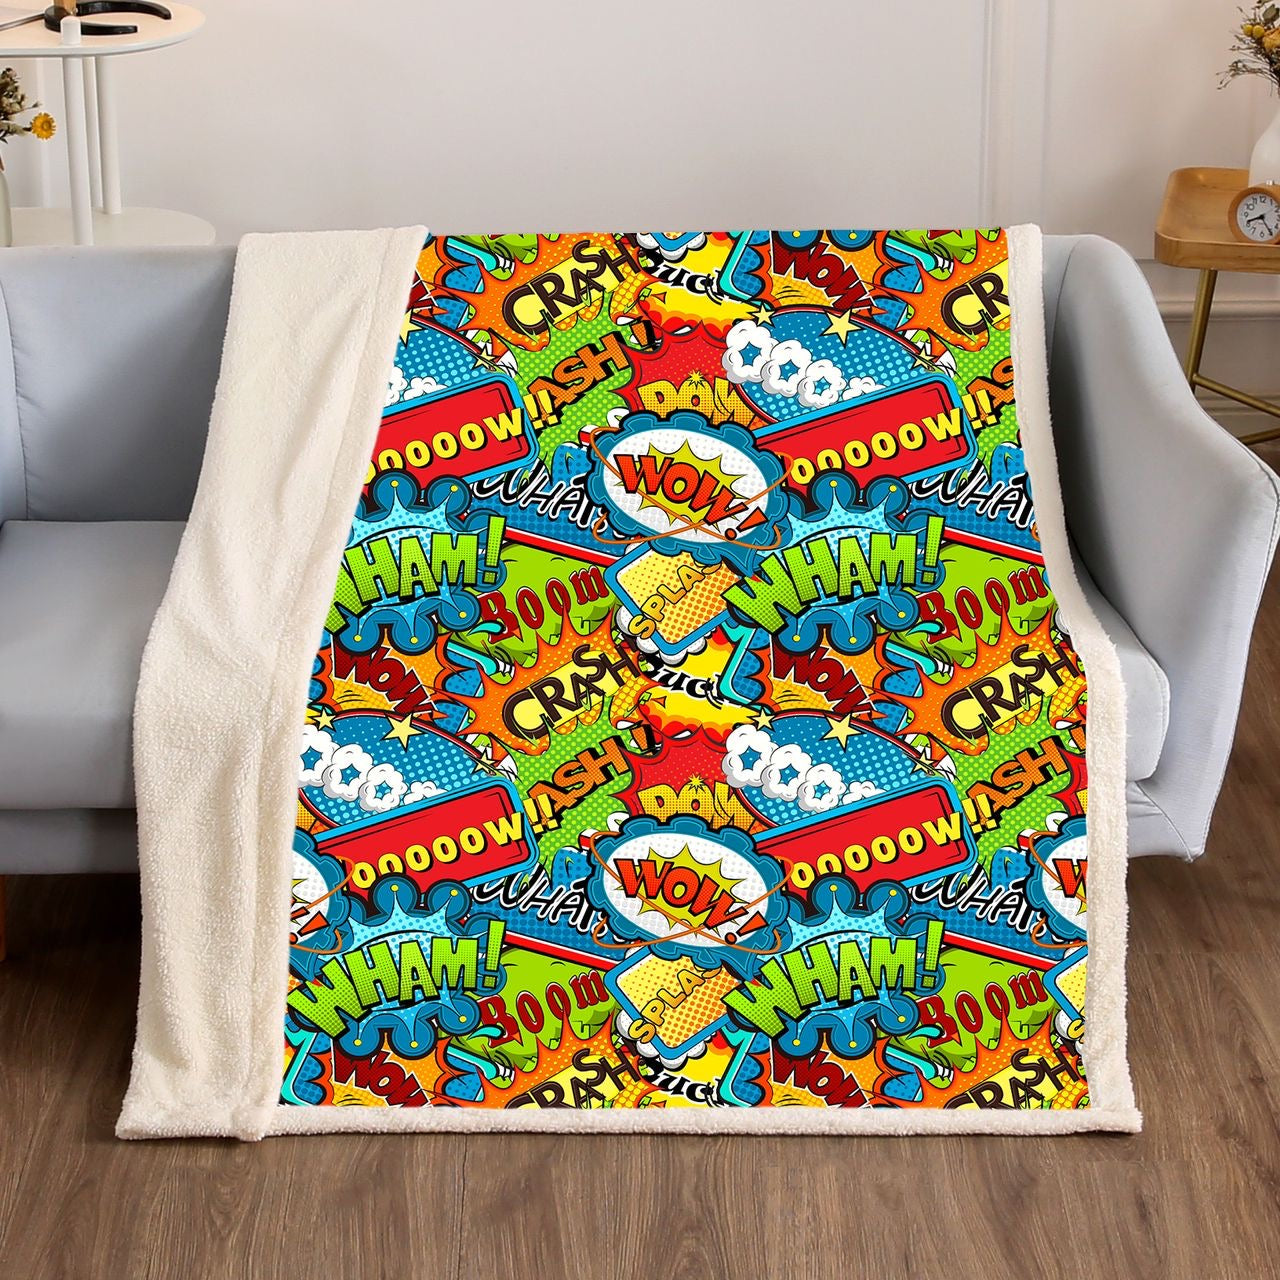 Dog Blanket Collection Wholesale